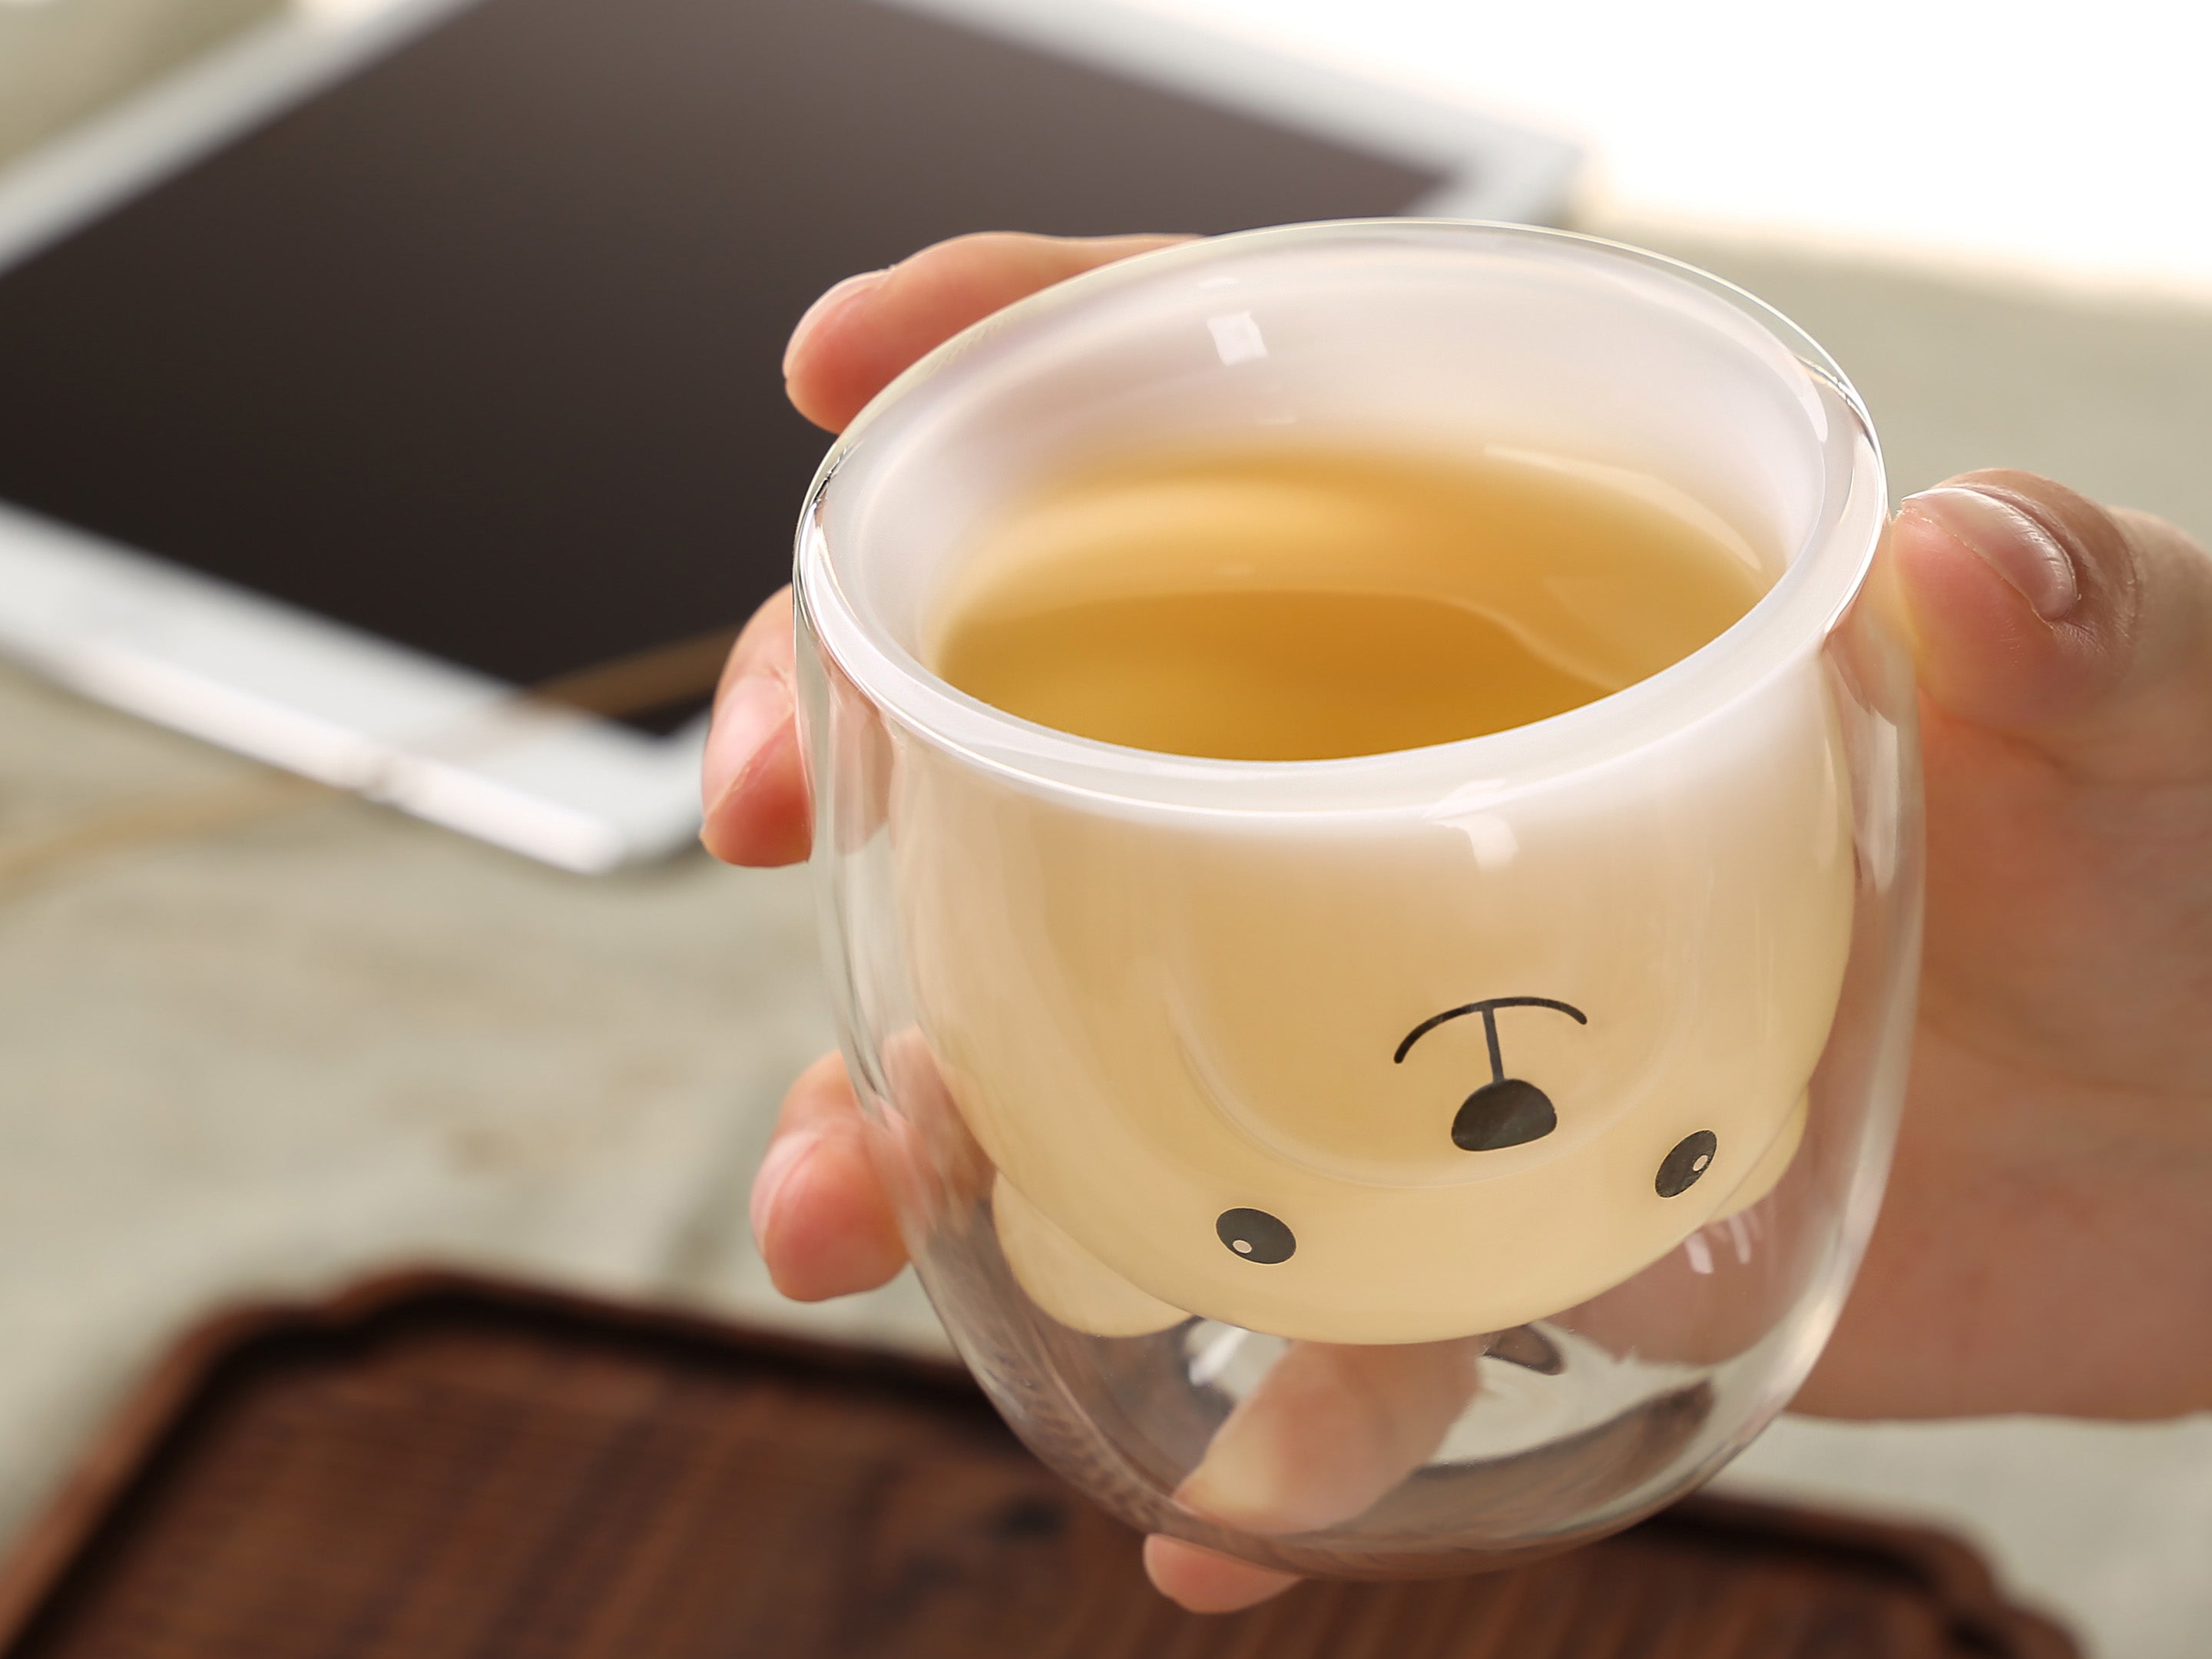 Cute Bear Shaped Glass Cup Cocktail Glass Coffee Mugs Beverage